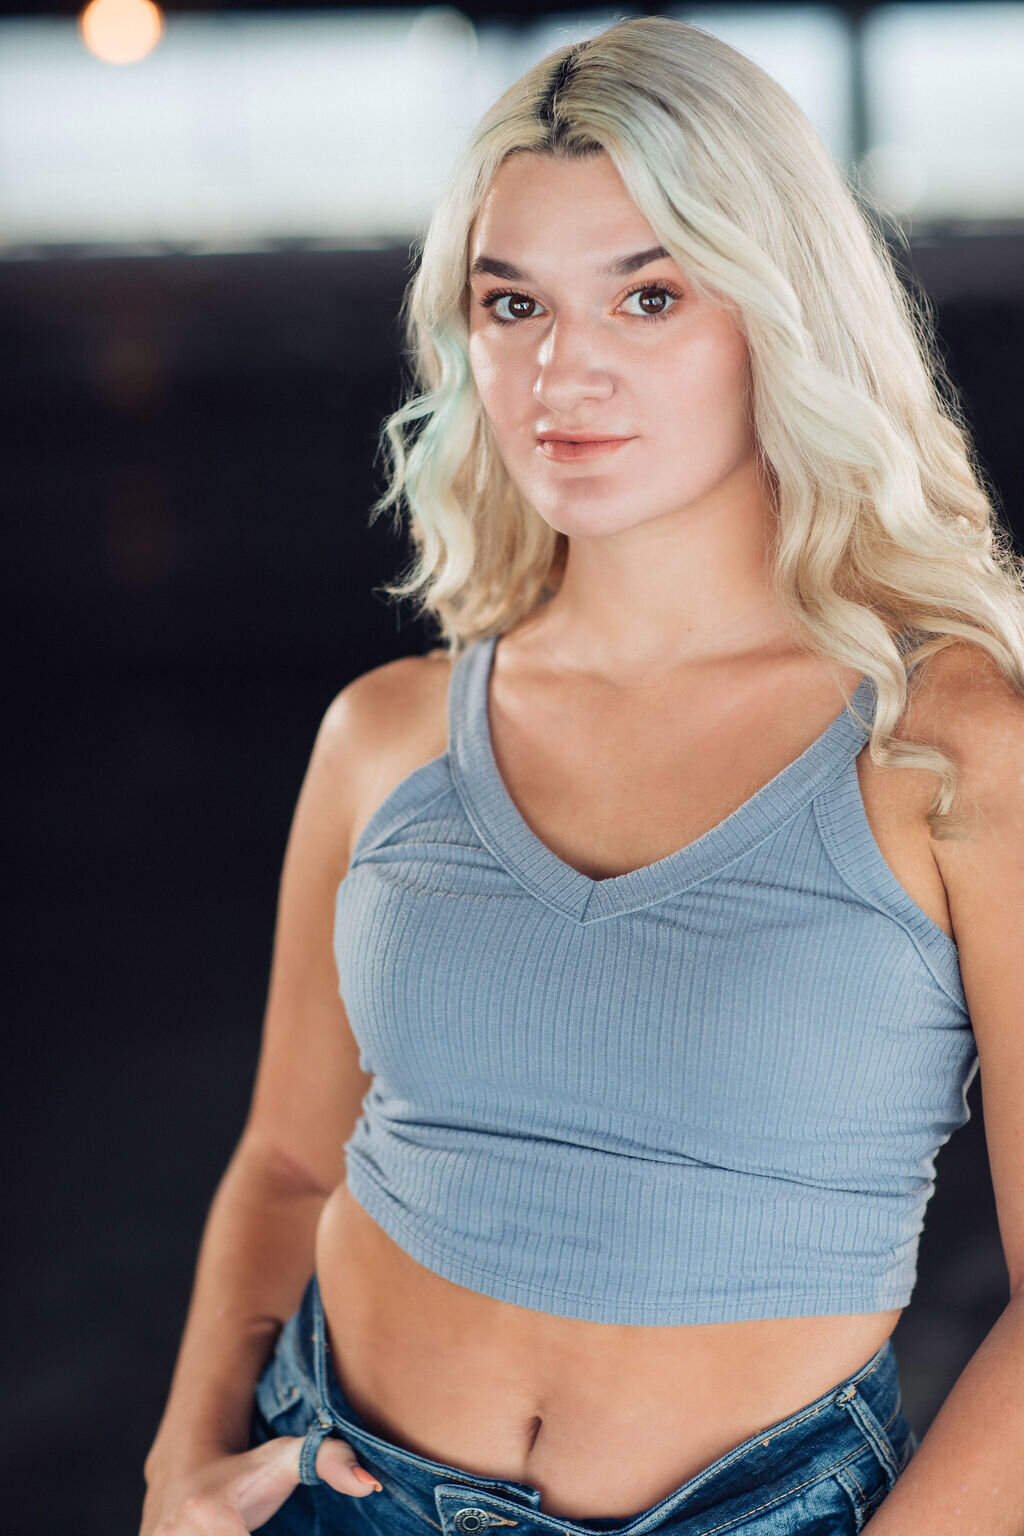 Headshot Photograph Of Young Woman In Light Blue Crop Top Los Angeles